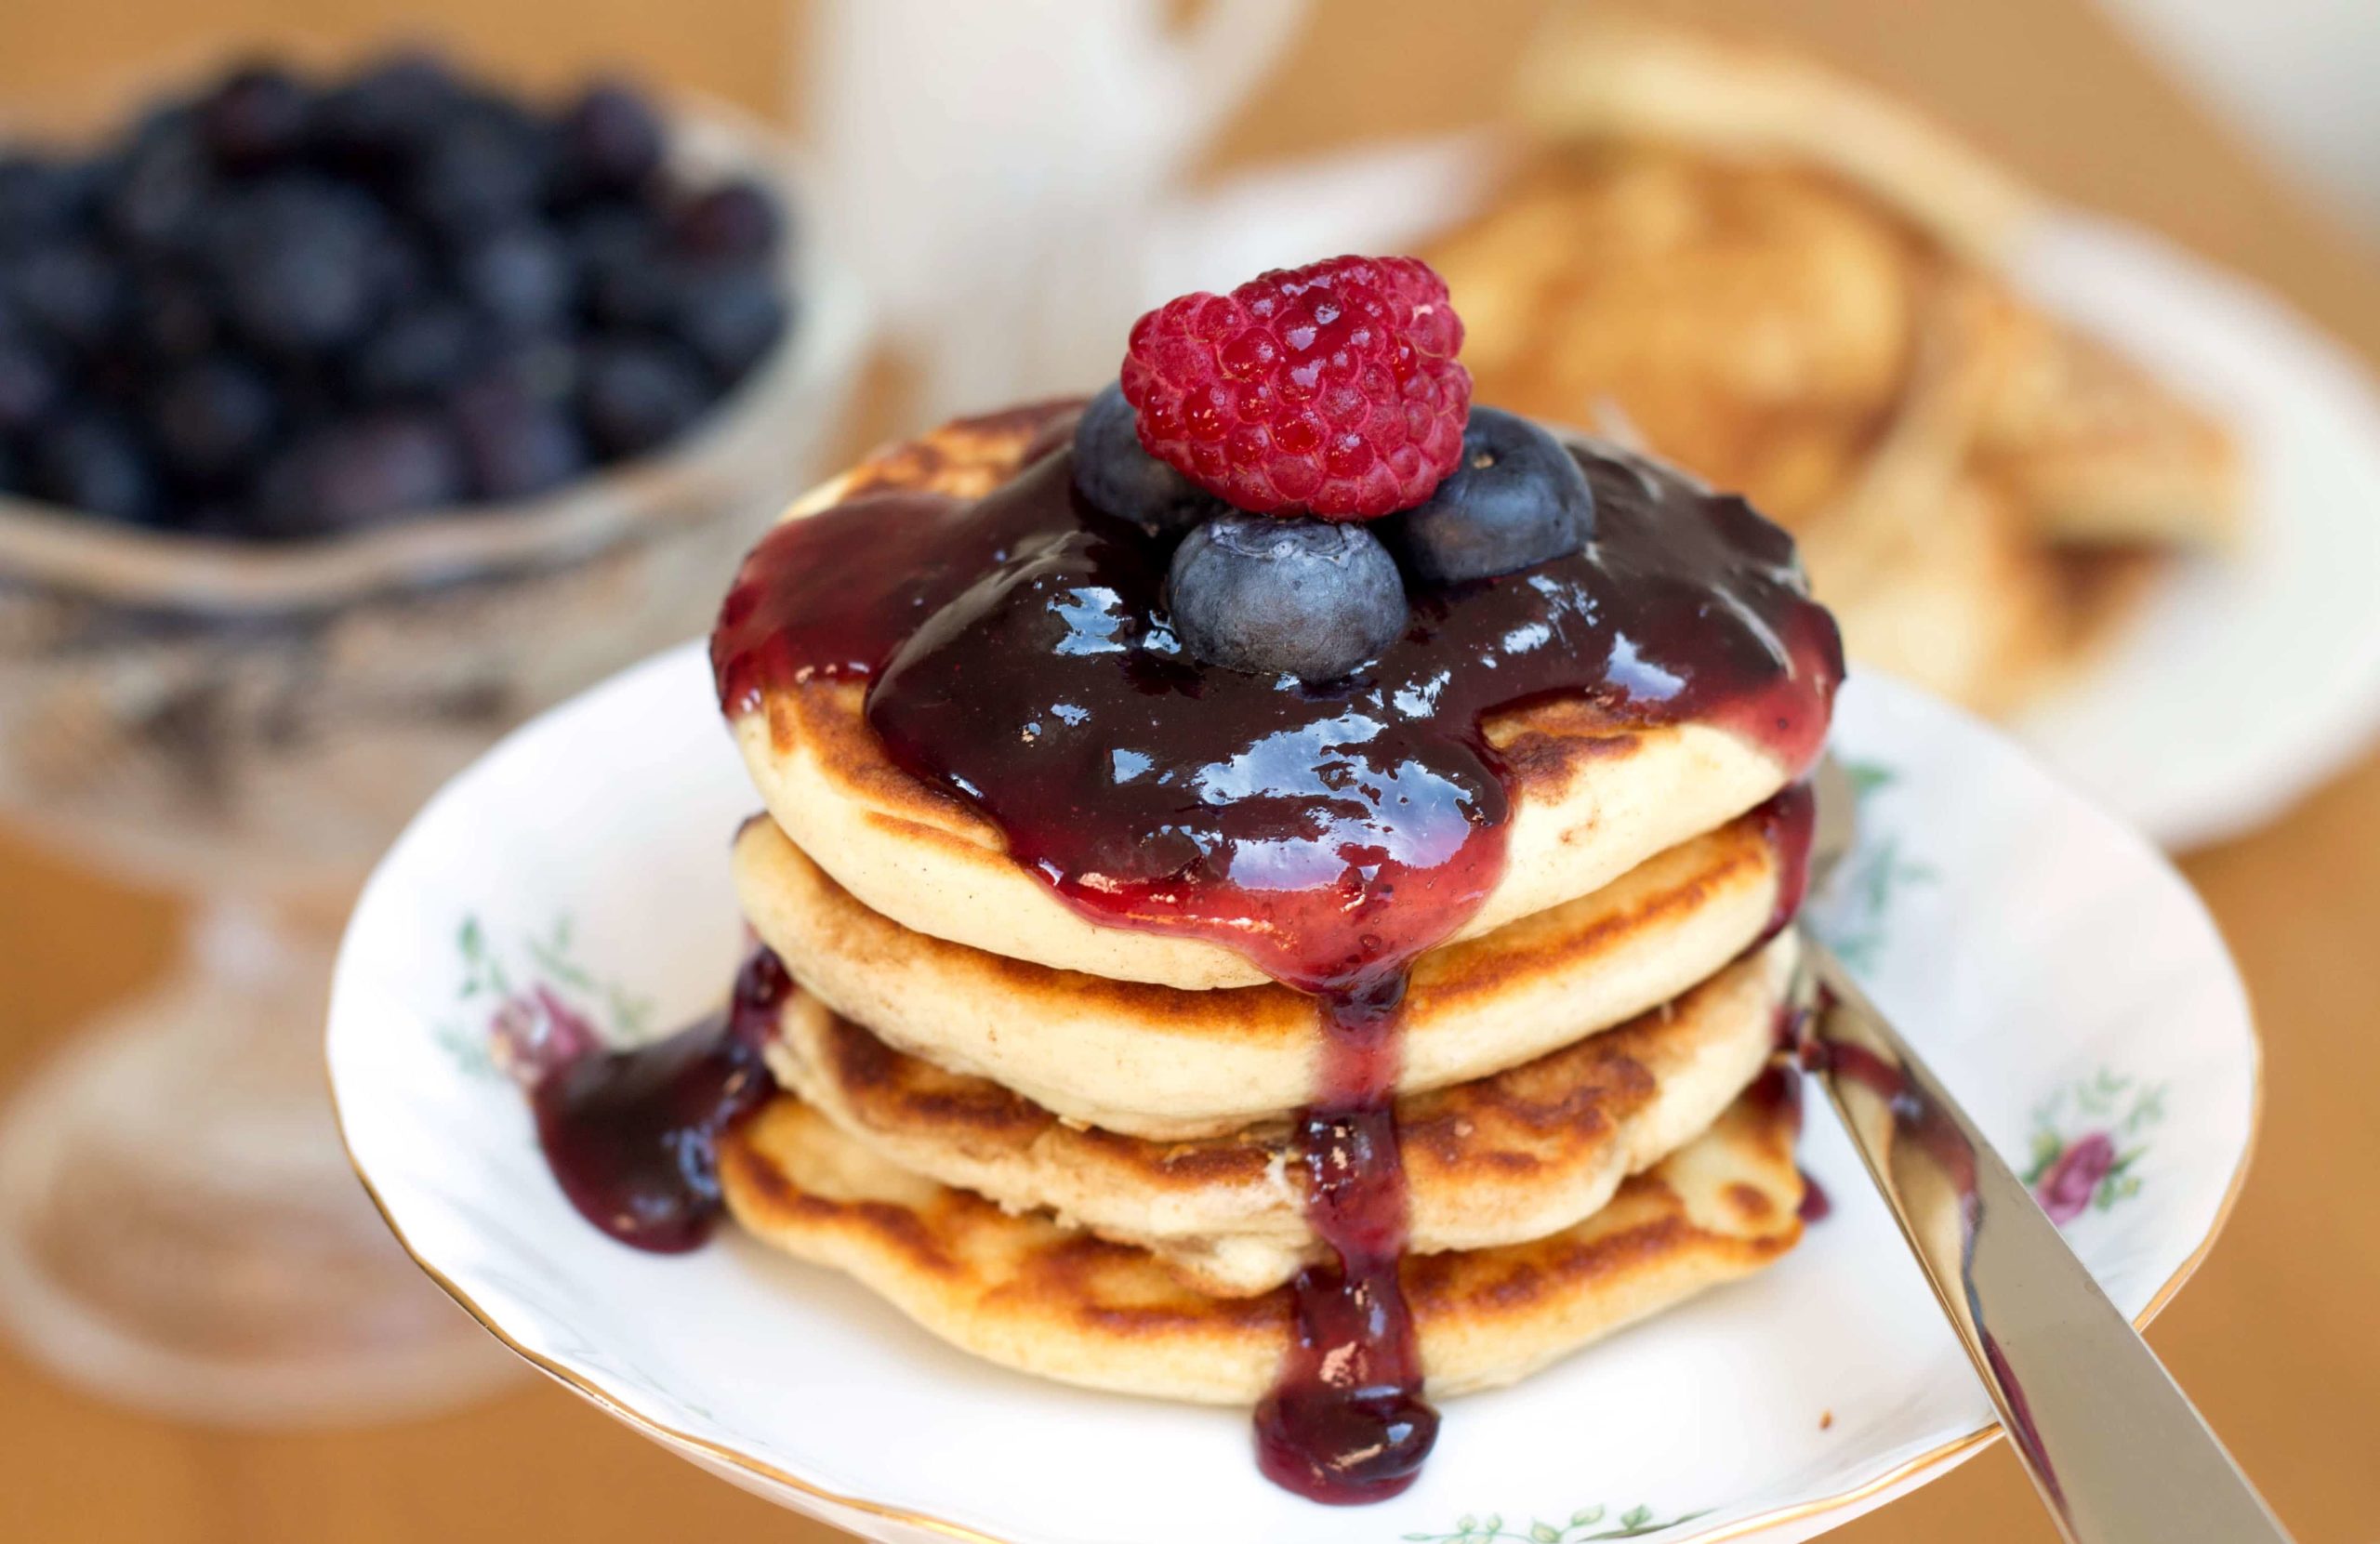 https://www.errenskitchen.com/wp-content/uploads/2015/09/Drop-Scones-Scotch-Pancakes-With-Mixed-Berry-Jam-feature-scaled.jpg